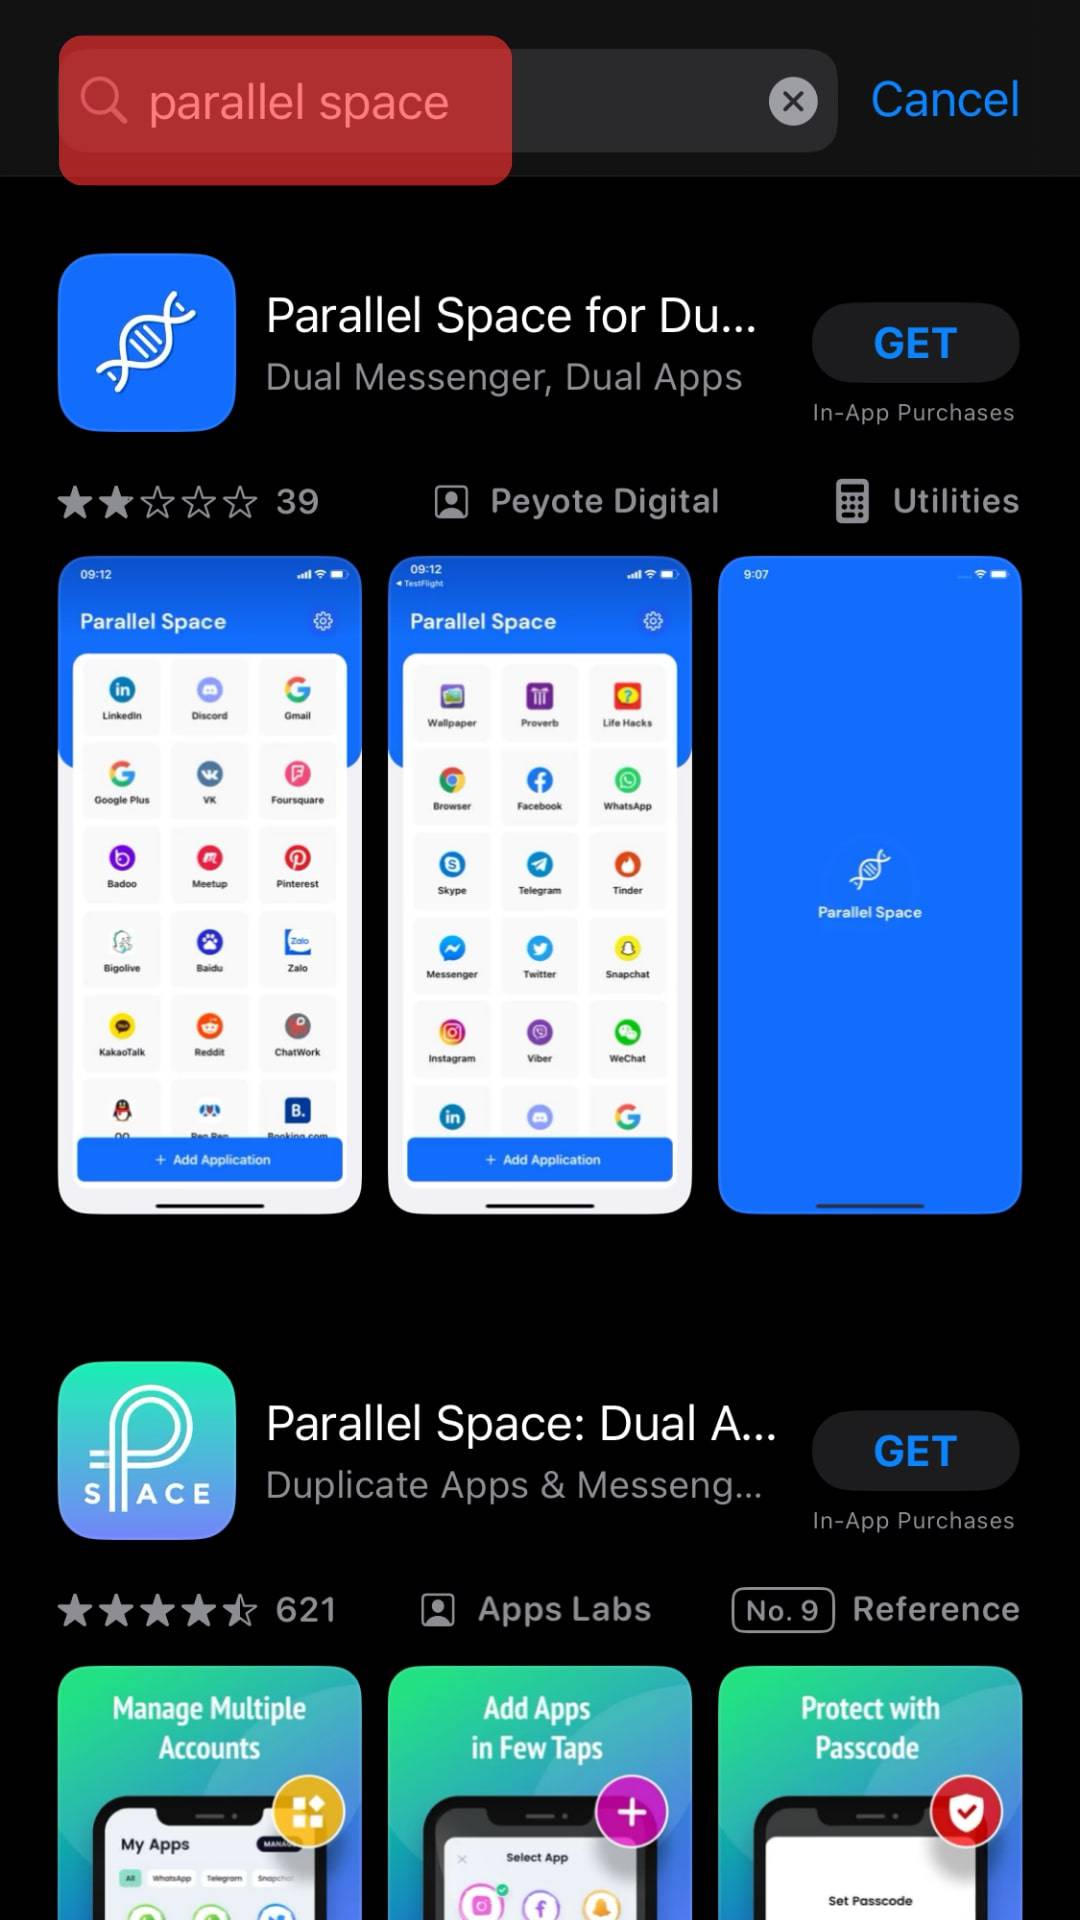 Go To The App Store And Search Parallel Space.